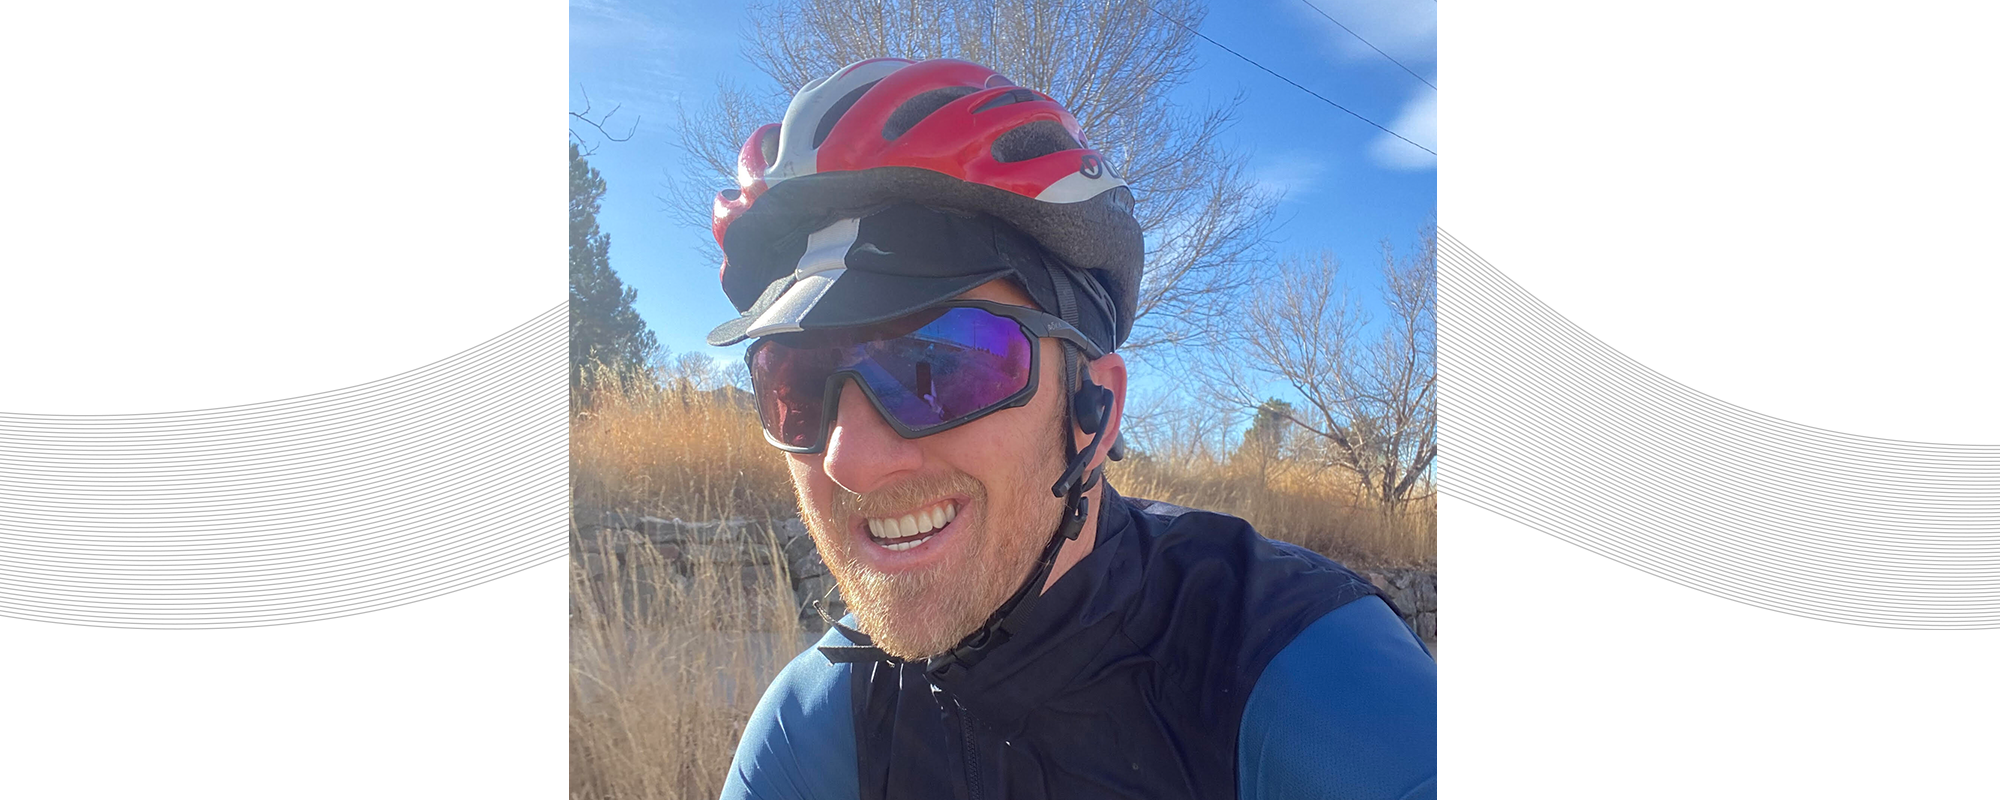 Dr. Justin Ross riding his bike while wearing helmet and AfterShokz Aeropex headphones